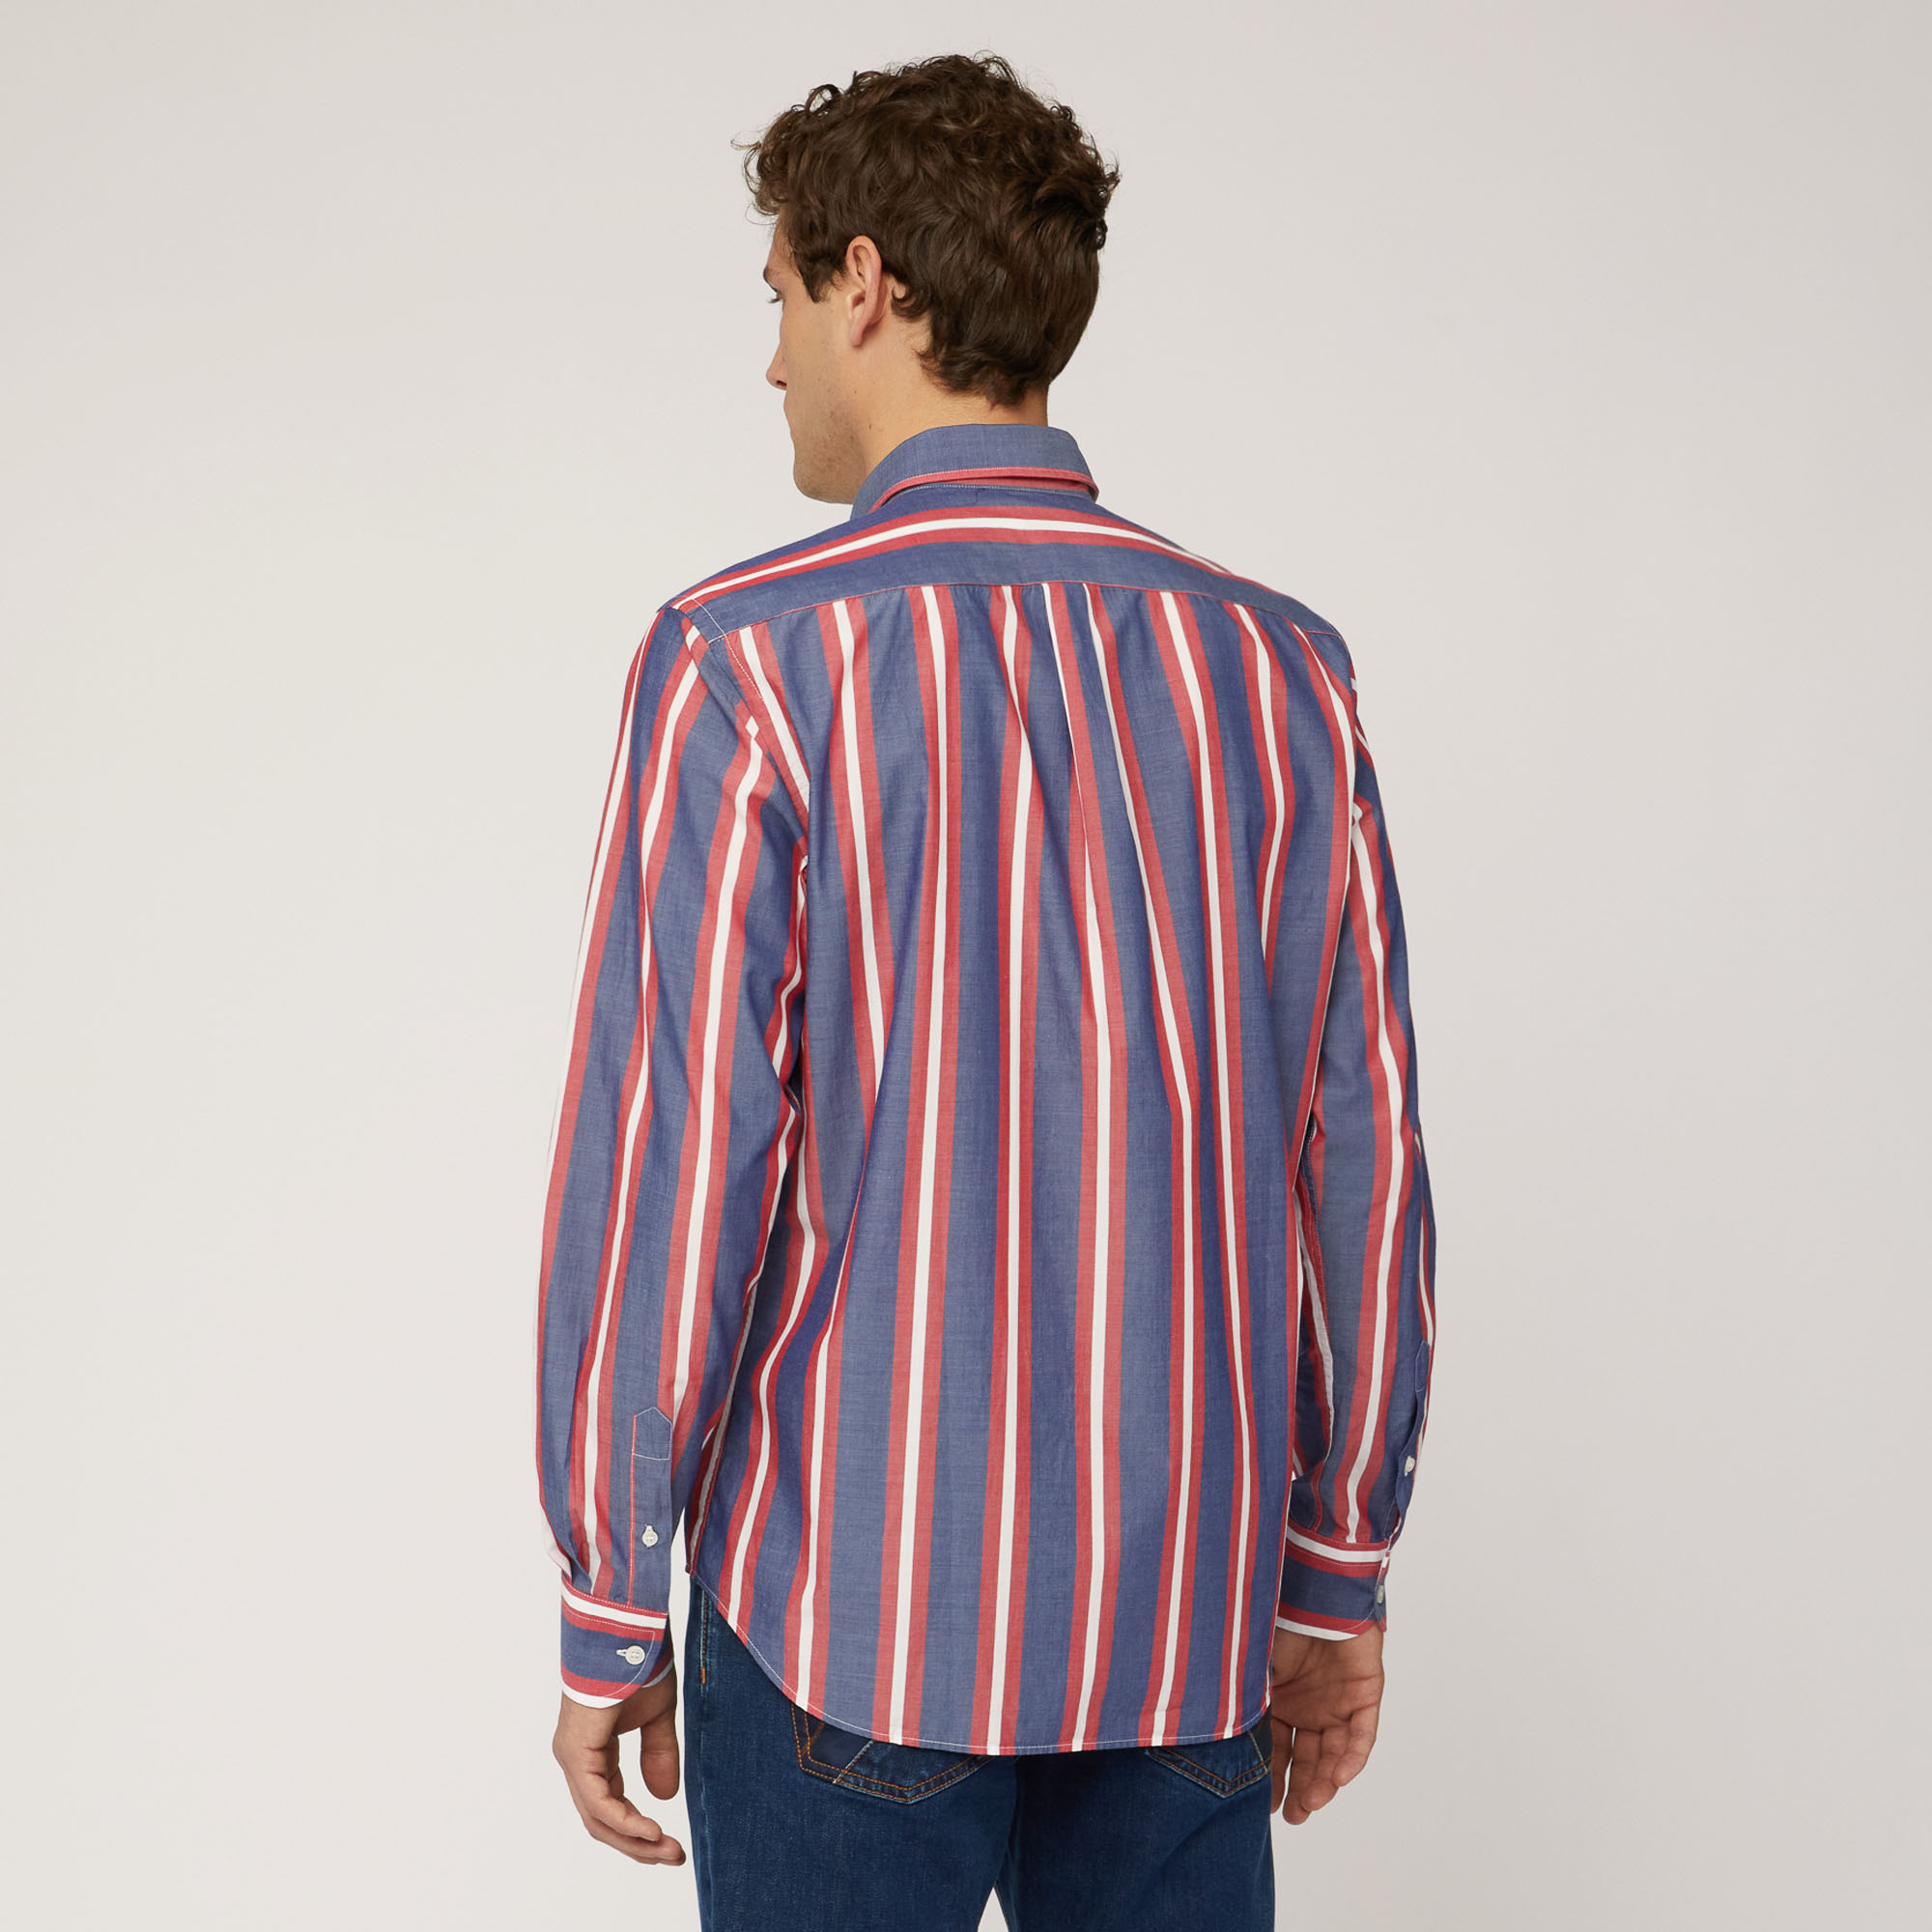 Cotton Shirt with Alternating Stripes